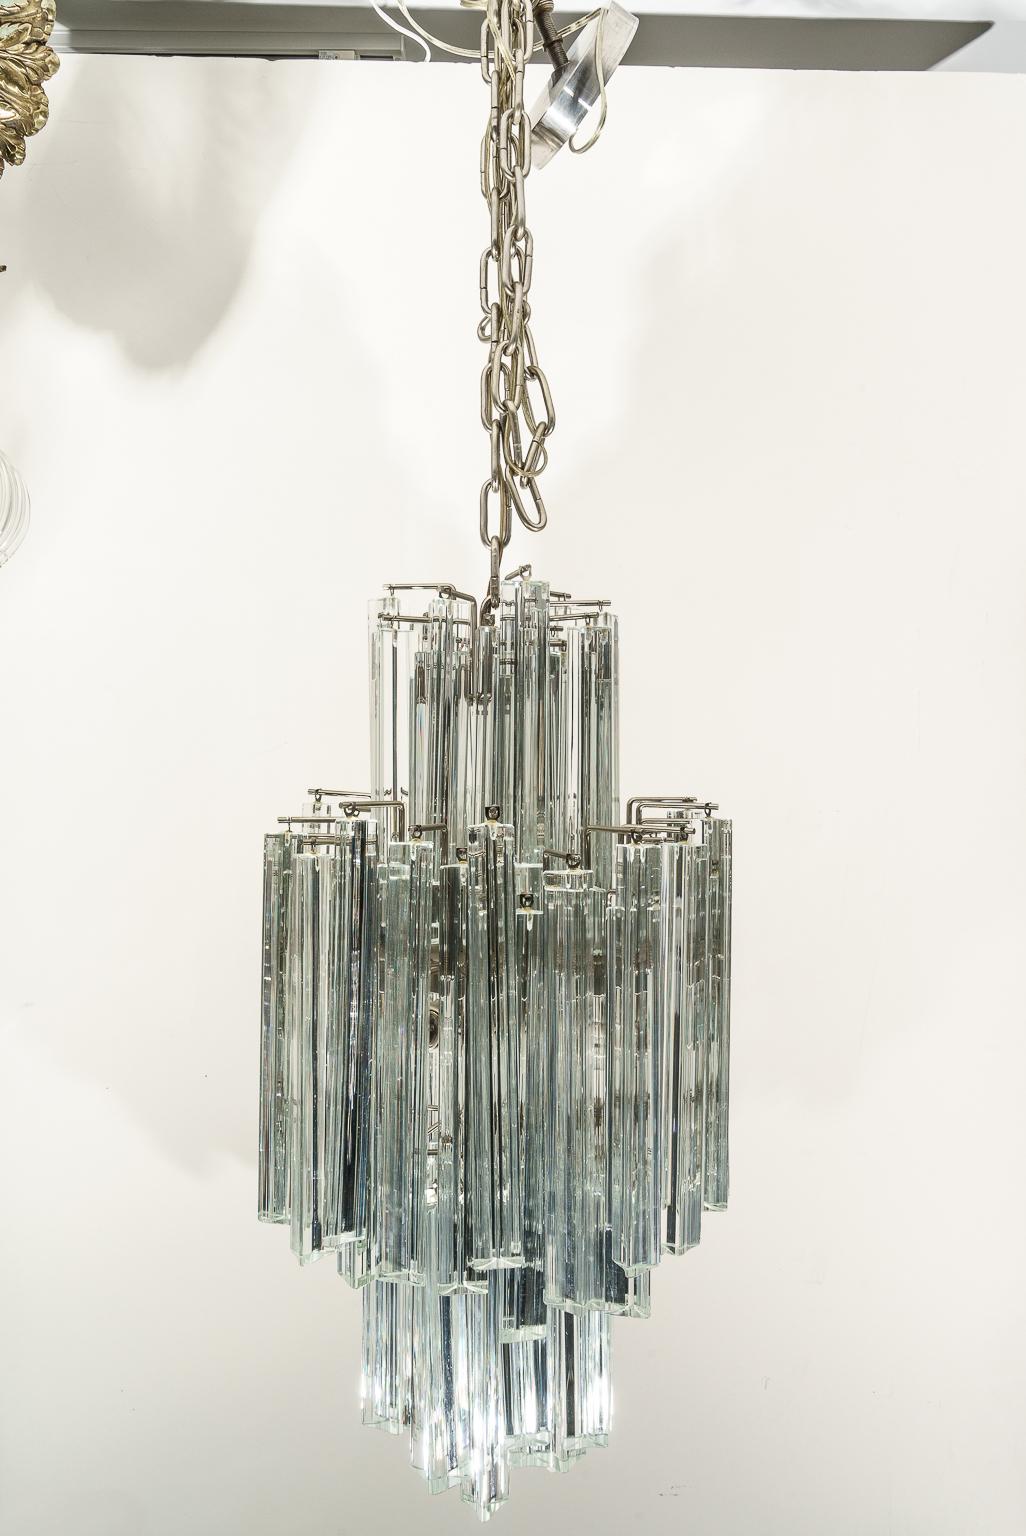 Vintage Venini chandelier for Camer Glass Clear Triangle Prisms from a Palm Beach estate

Note: Dimension not including the chain are 27